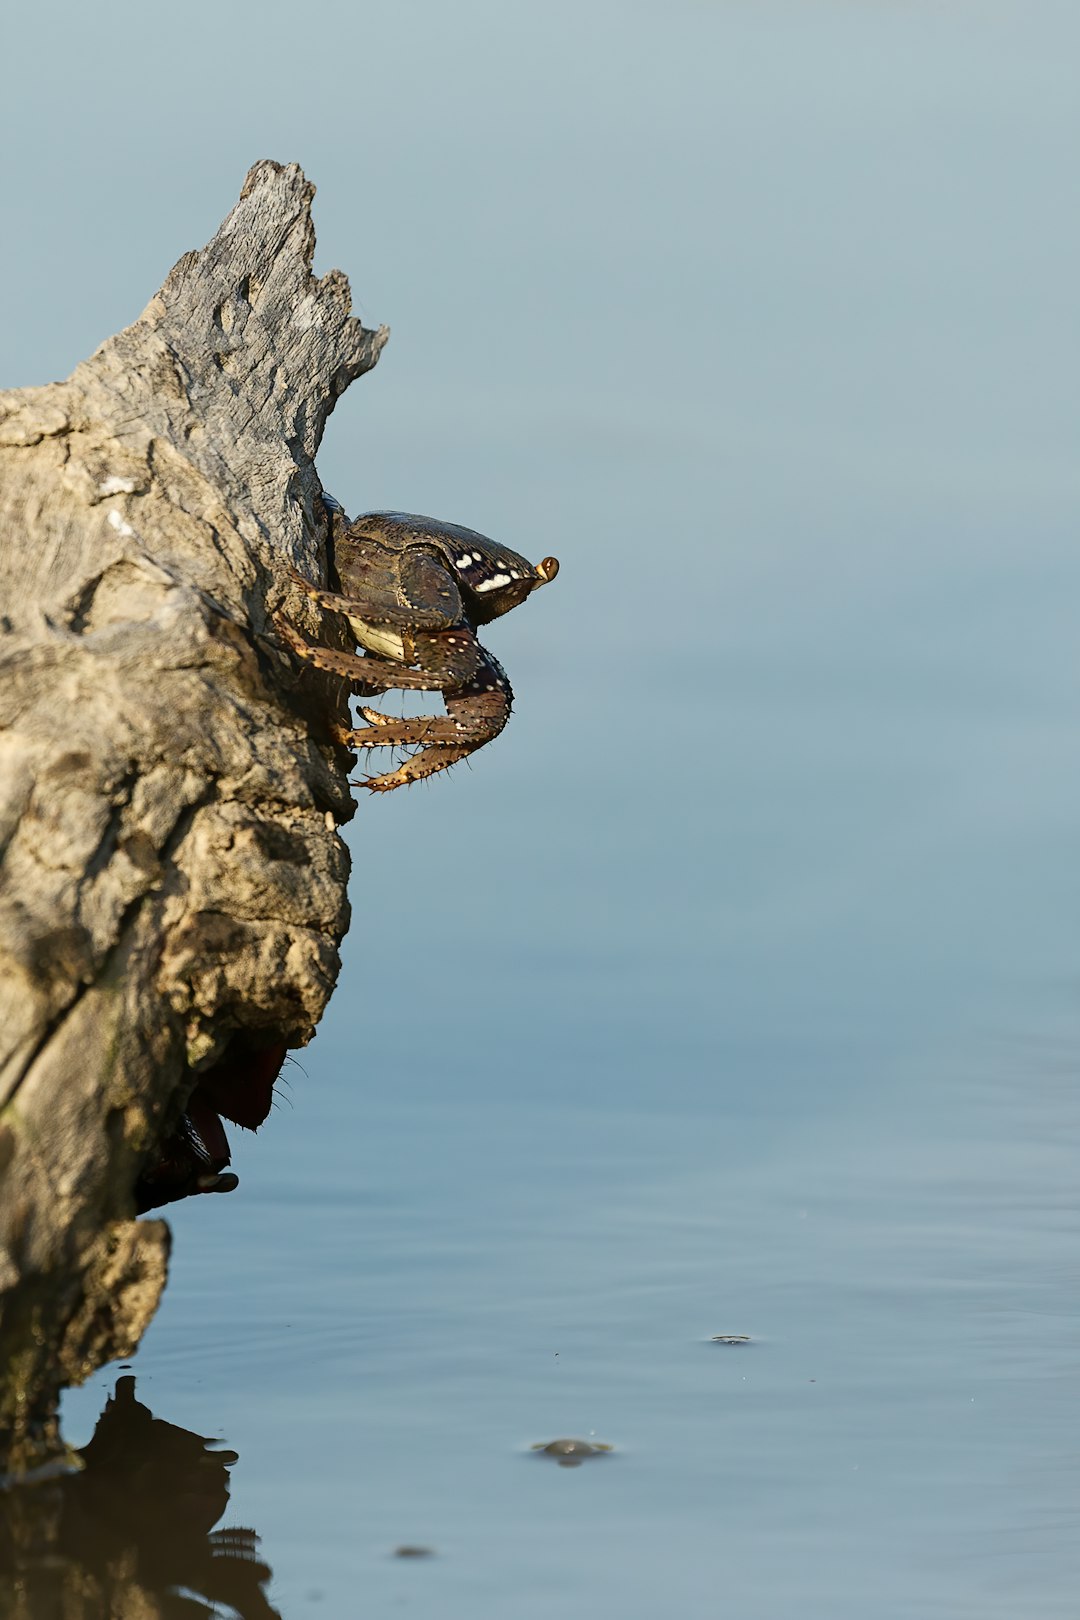 black and brown frog on gray rock